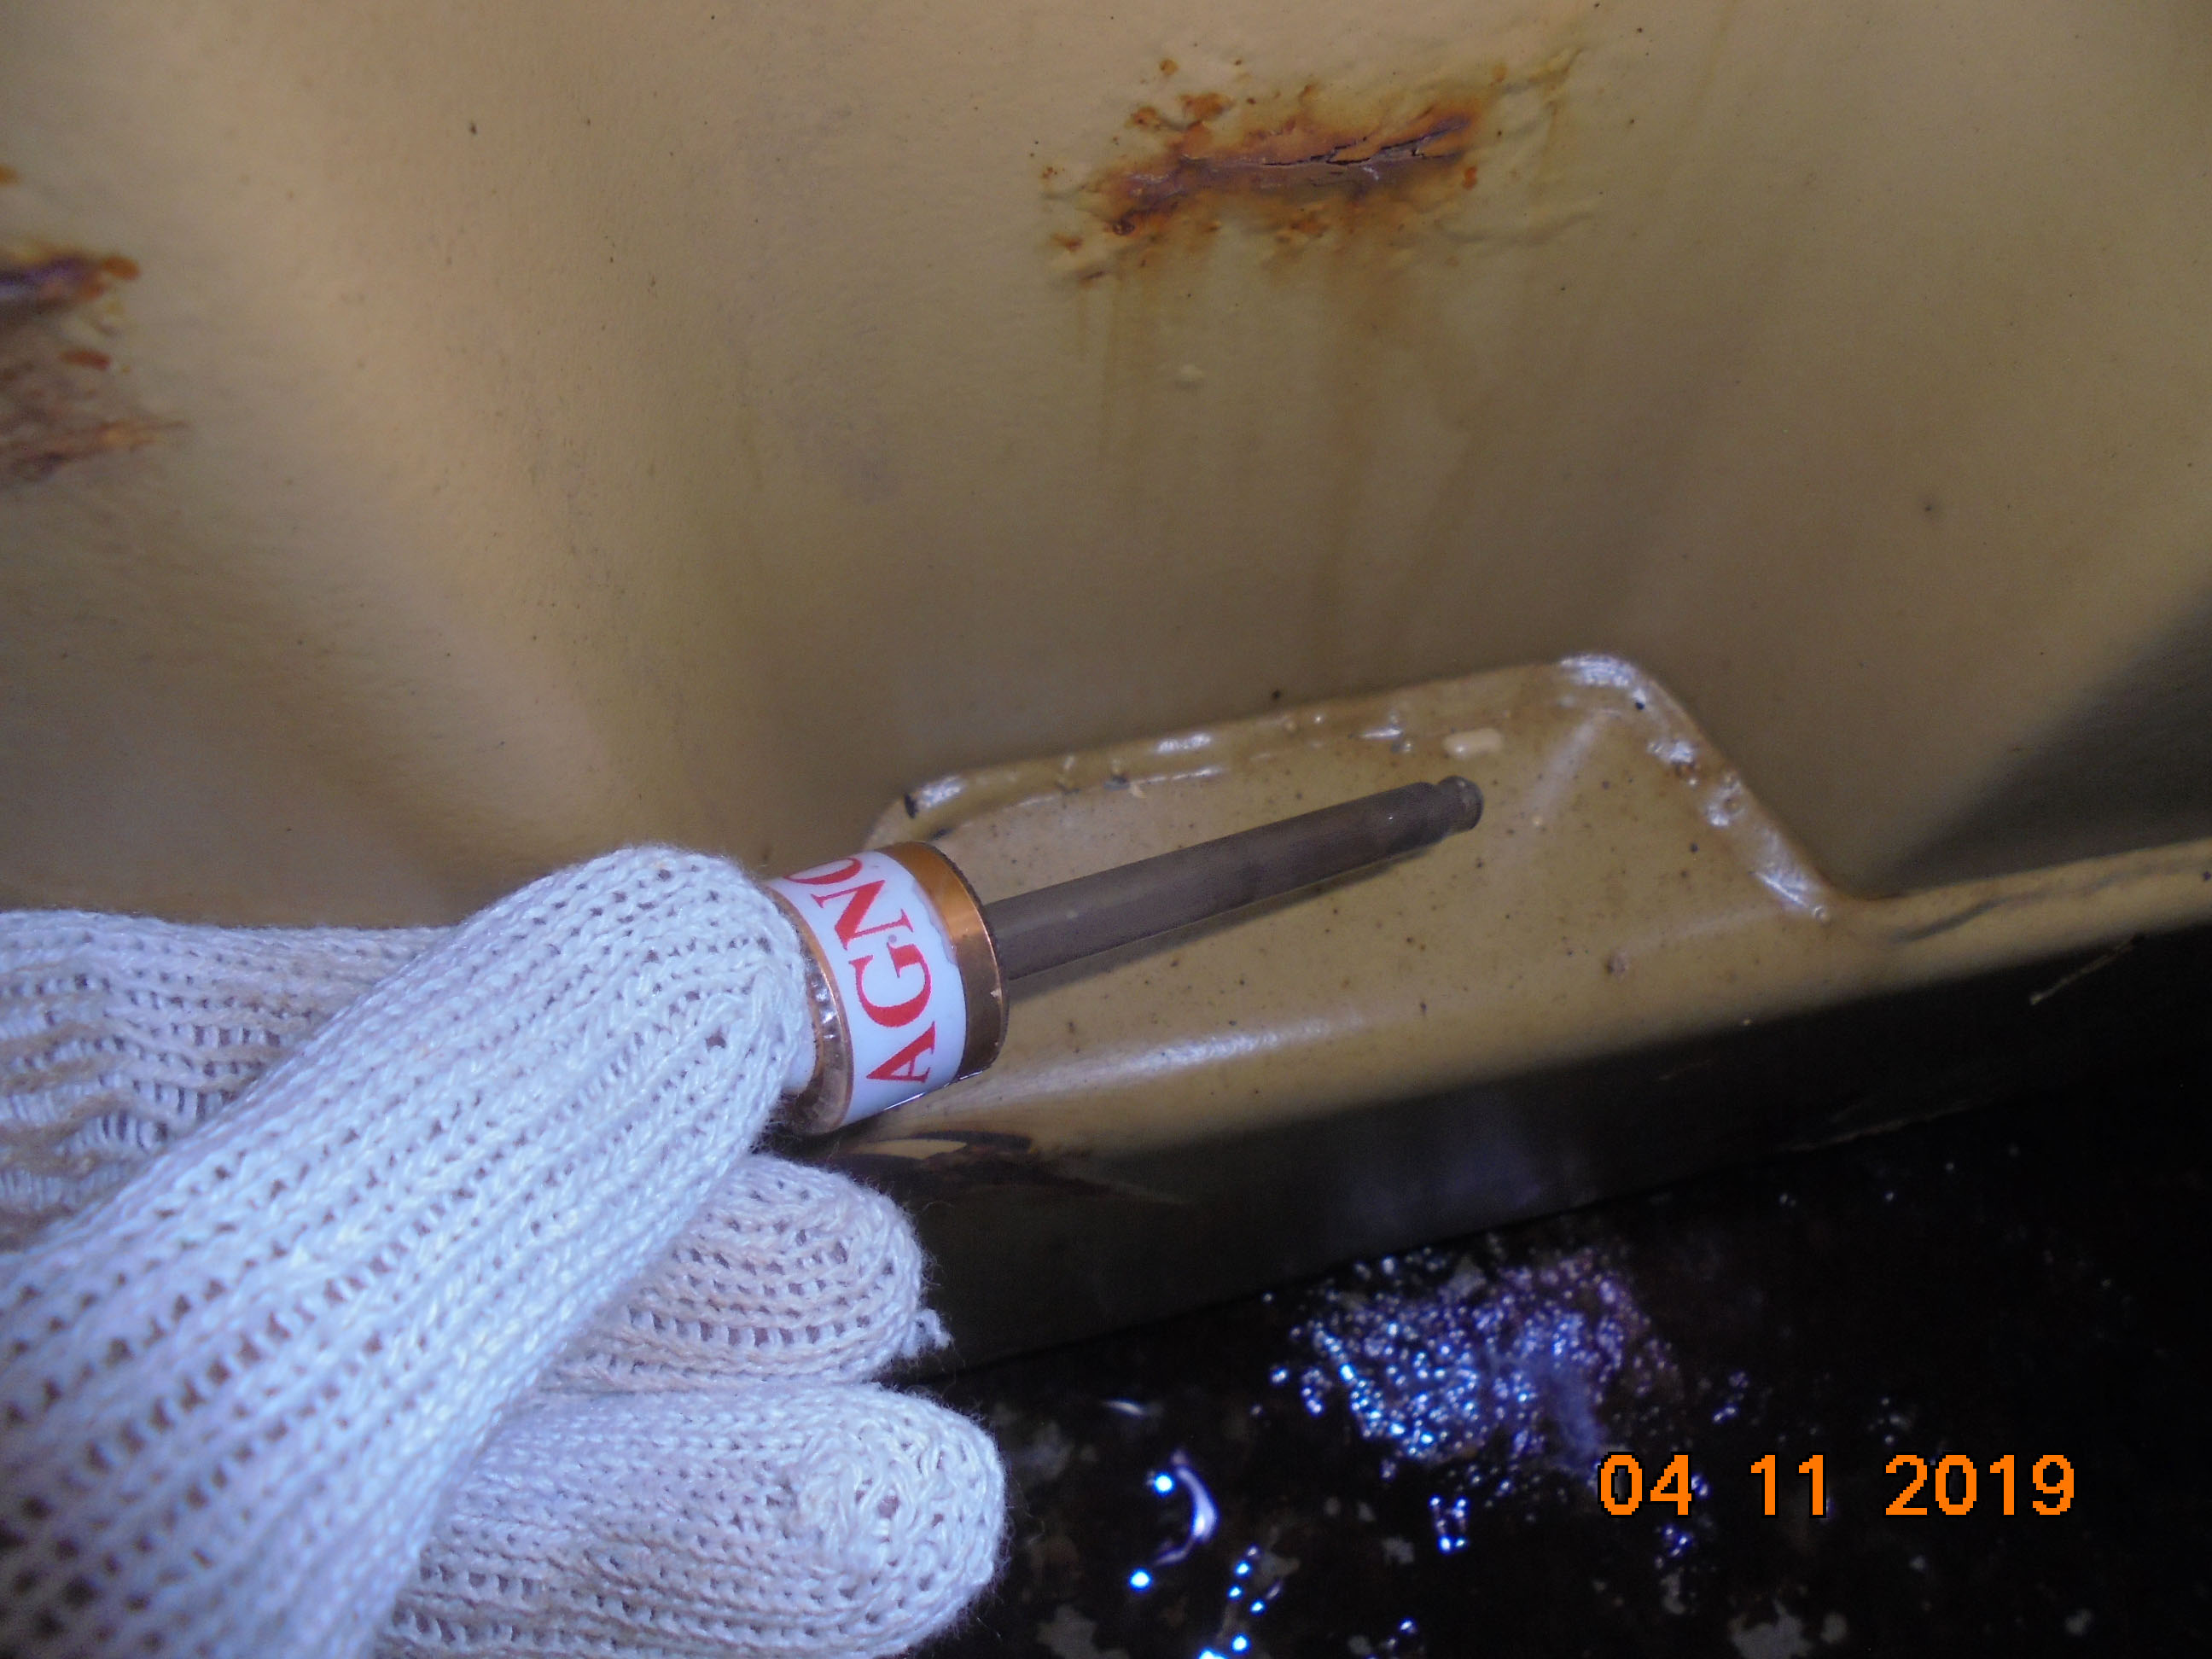 MARINE ACCIDENT SURVEY - FLOODED CONTAINER CONDITION